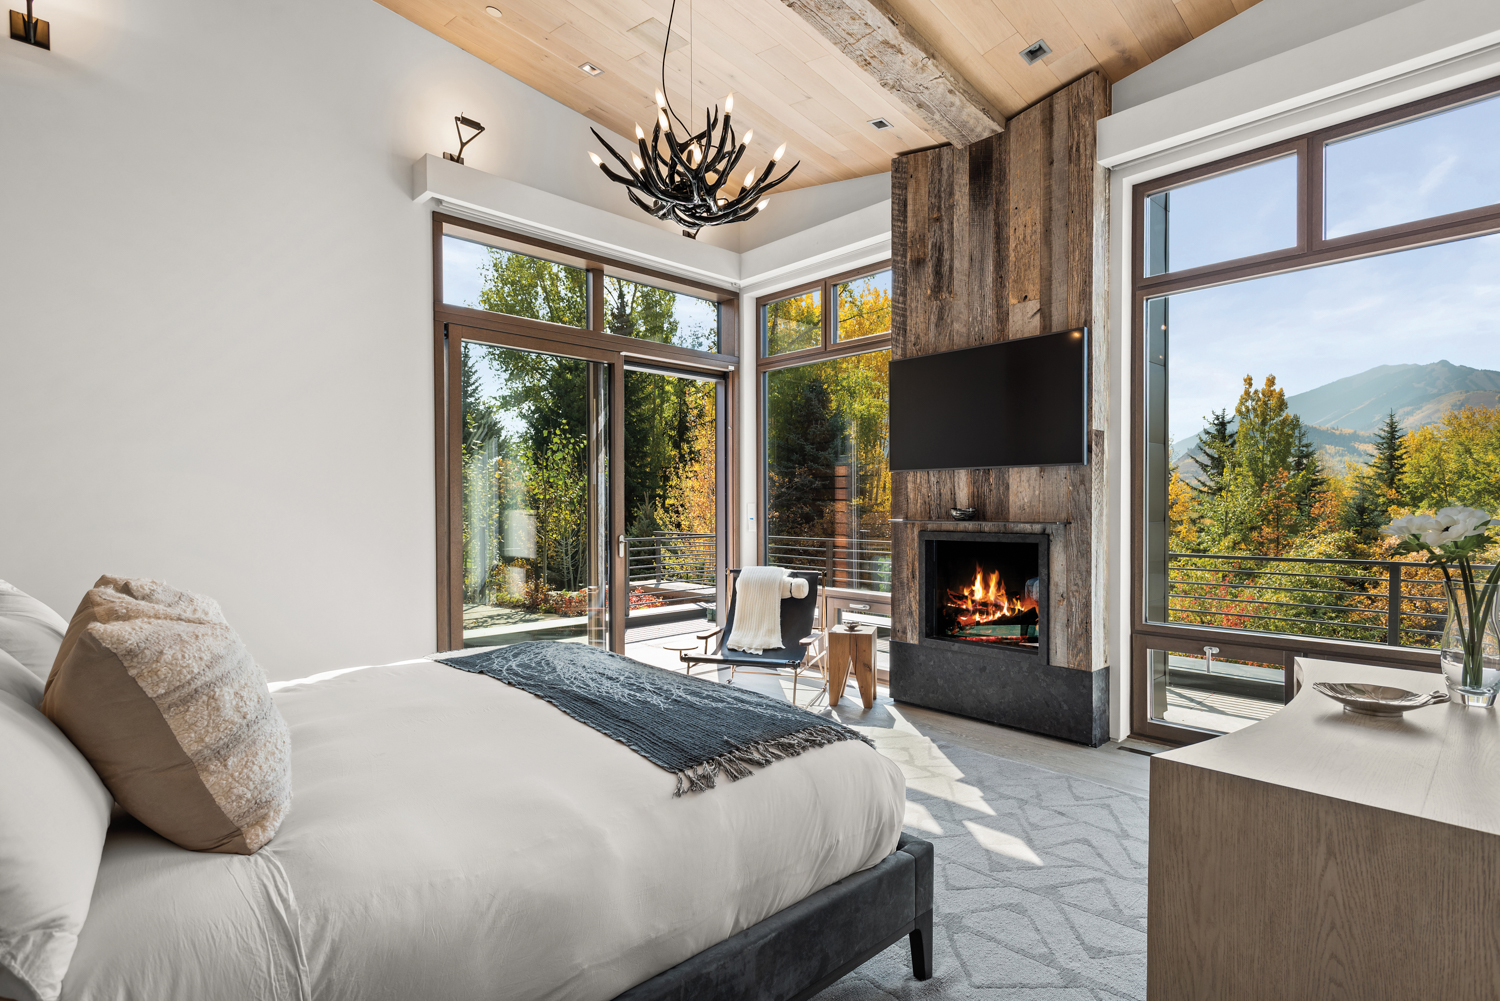 A bedroom designed by Kristin Dittmar with large windows, mountain views in the fall, a fireplace and white bed